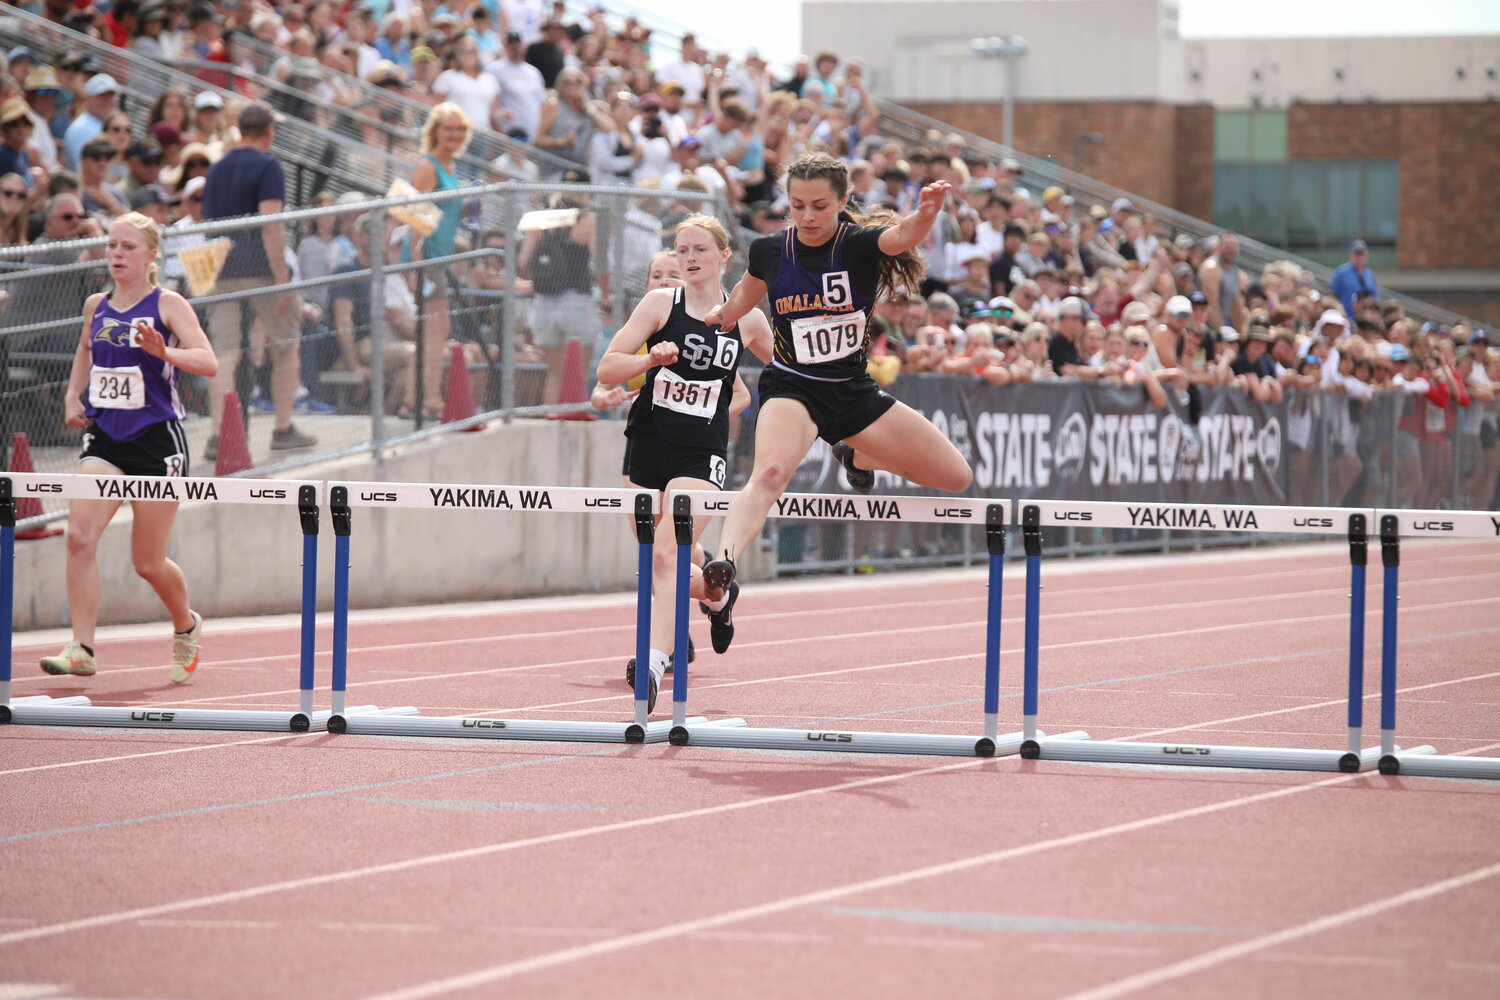 Onalaska's Brooklyn Sandridge finished second in the girls 300-meter hurdles at the 2B state championships, May 27 in Yakima.